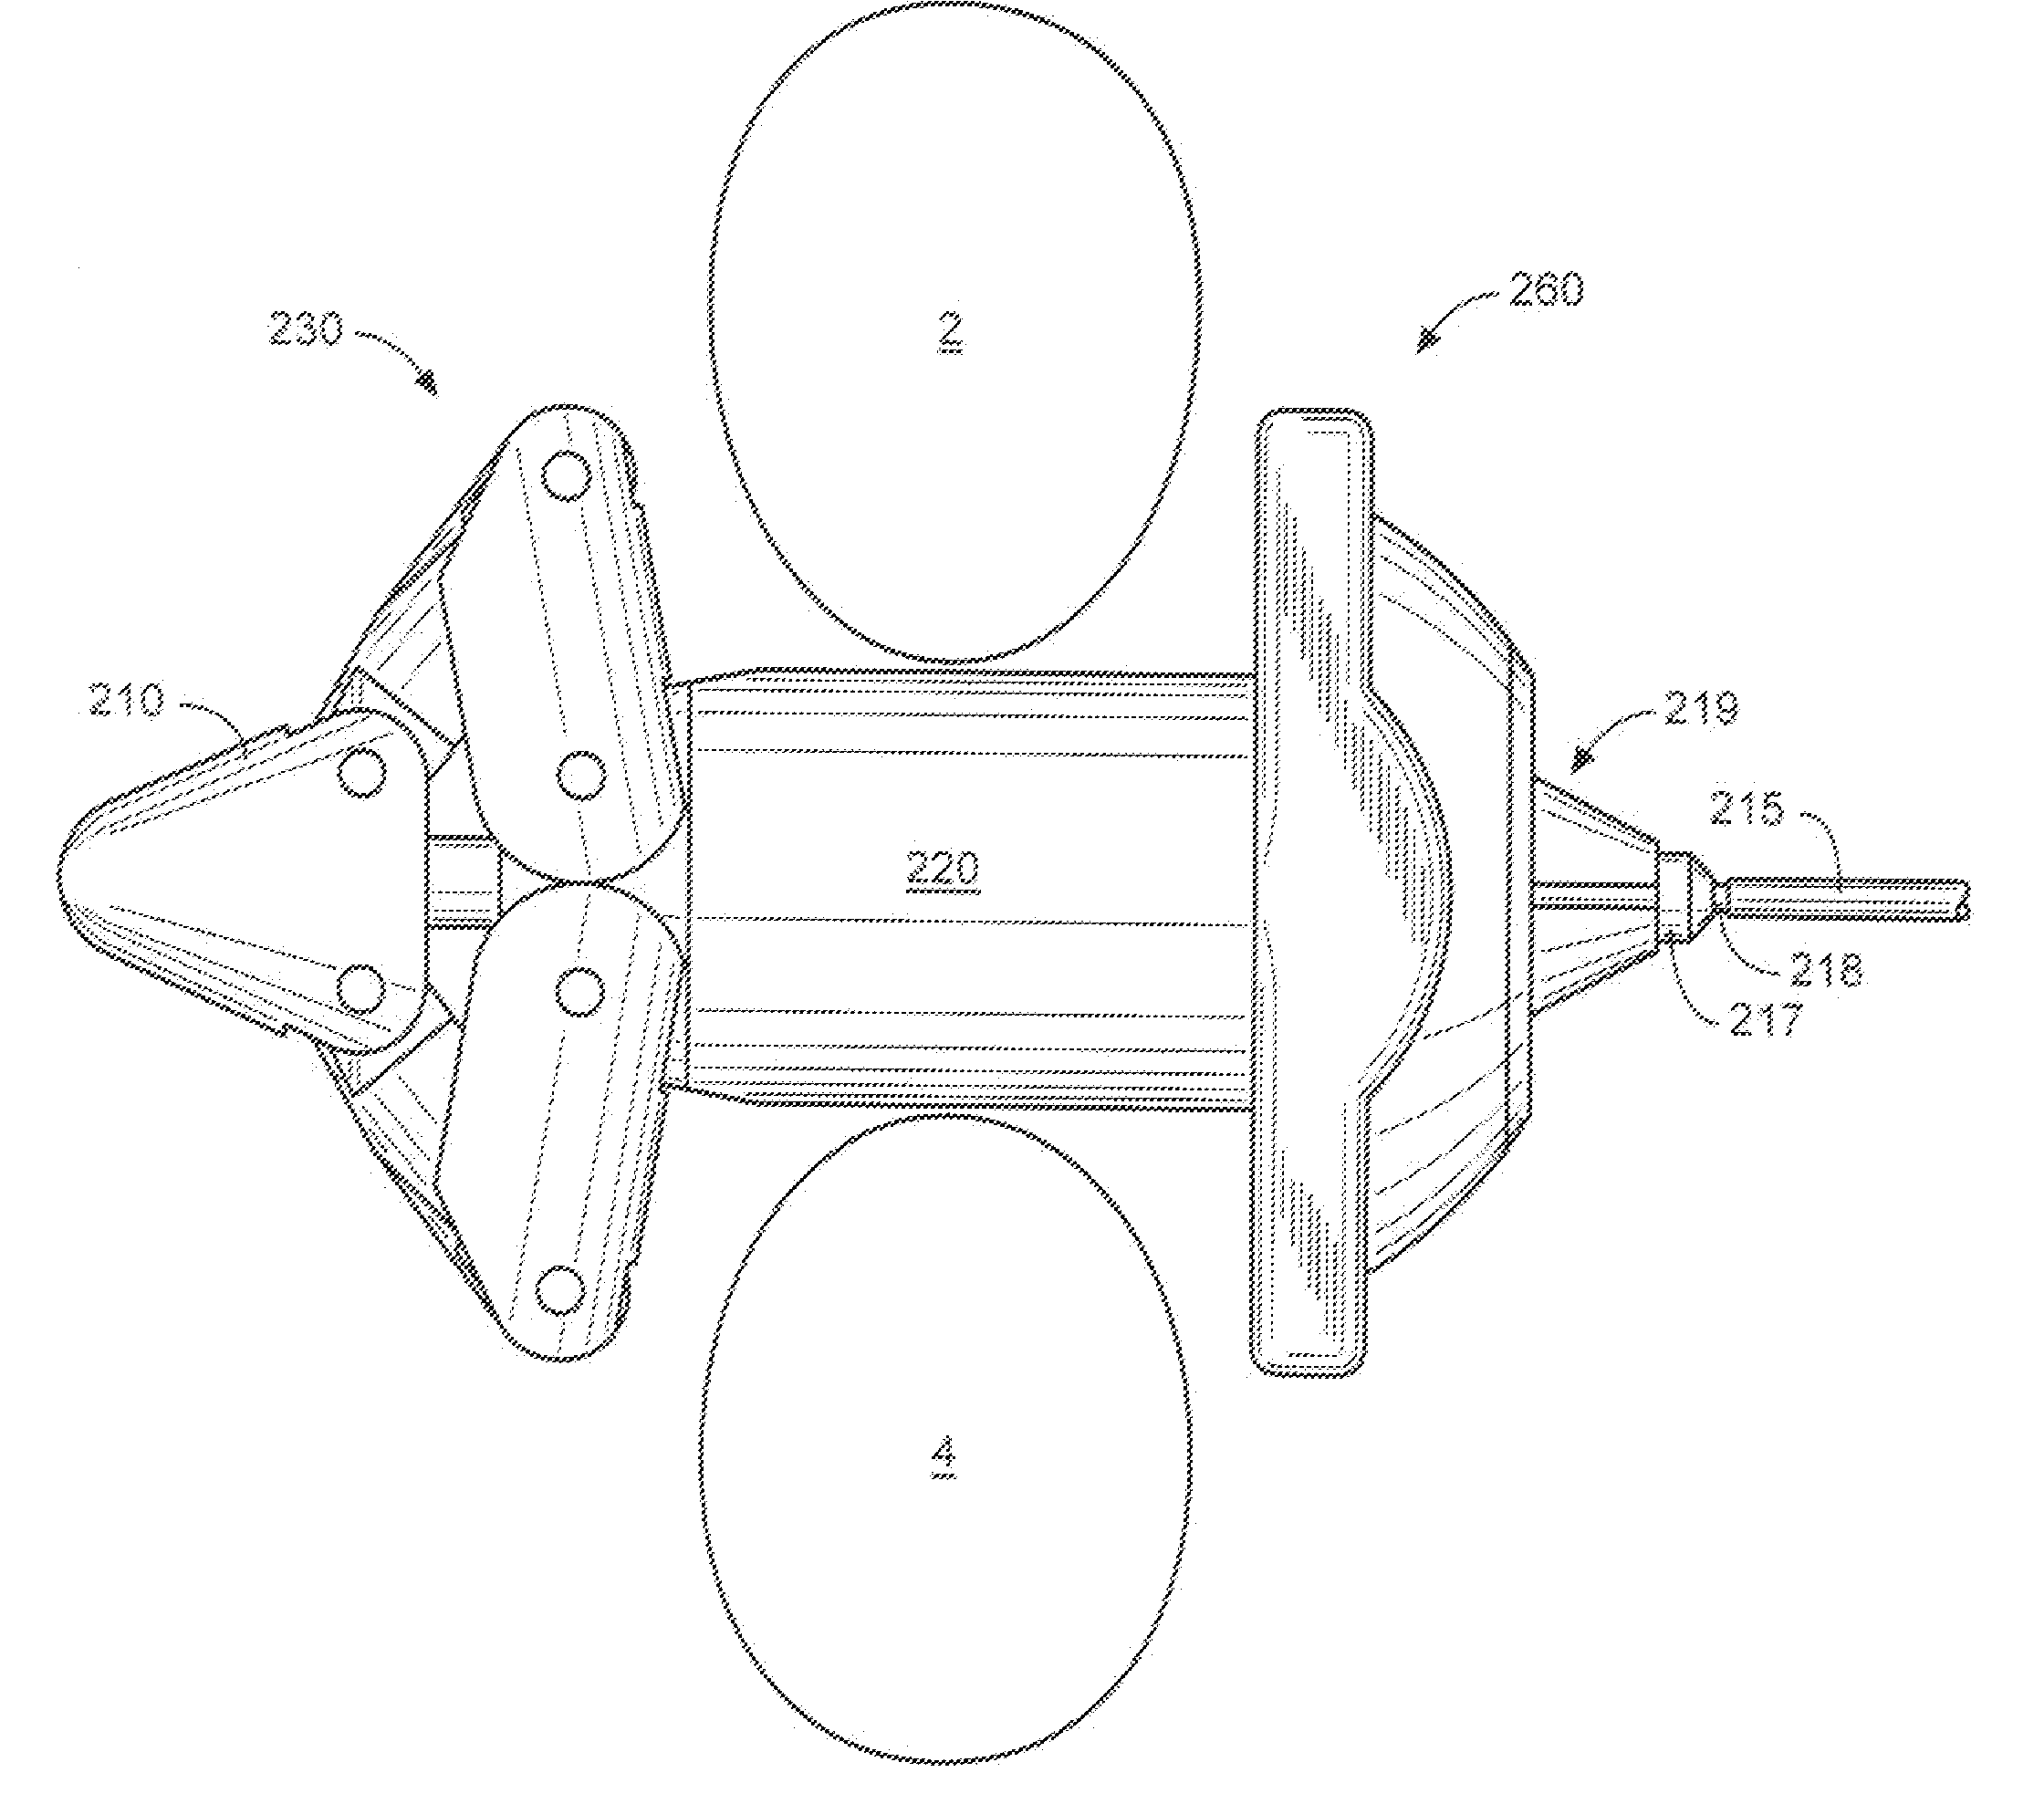 Interspinous process implant having a fixed wing and a deployable wing and method of implantation